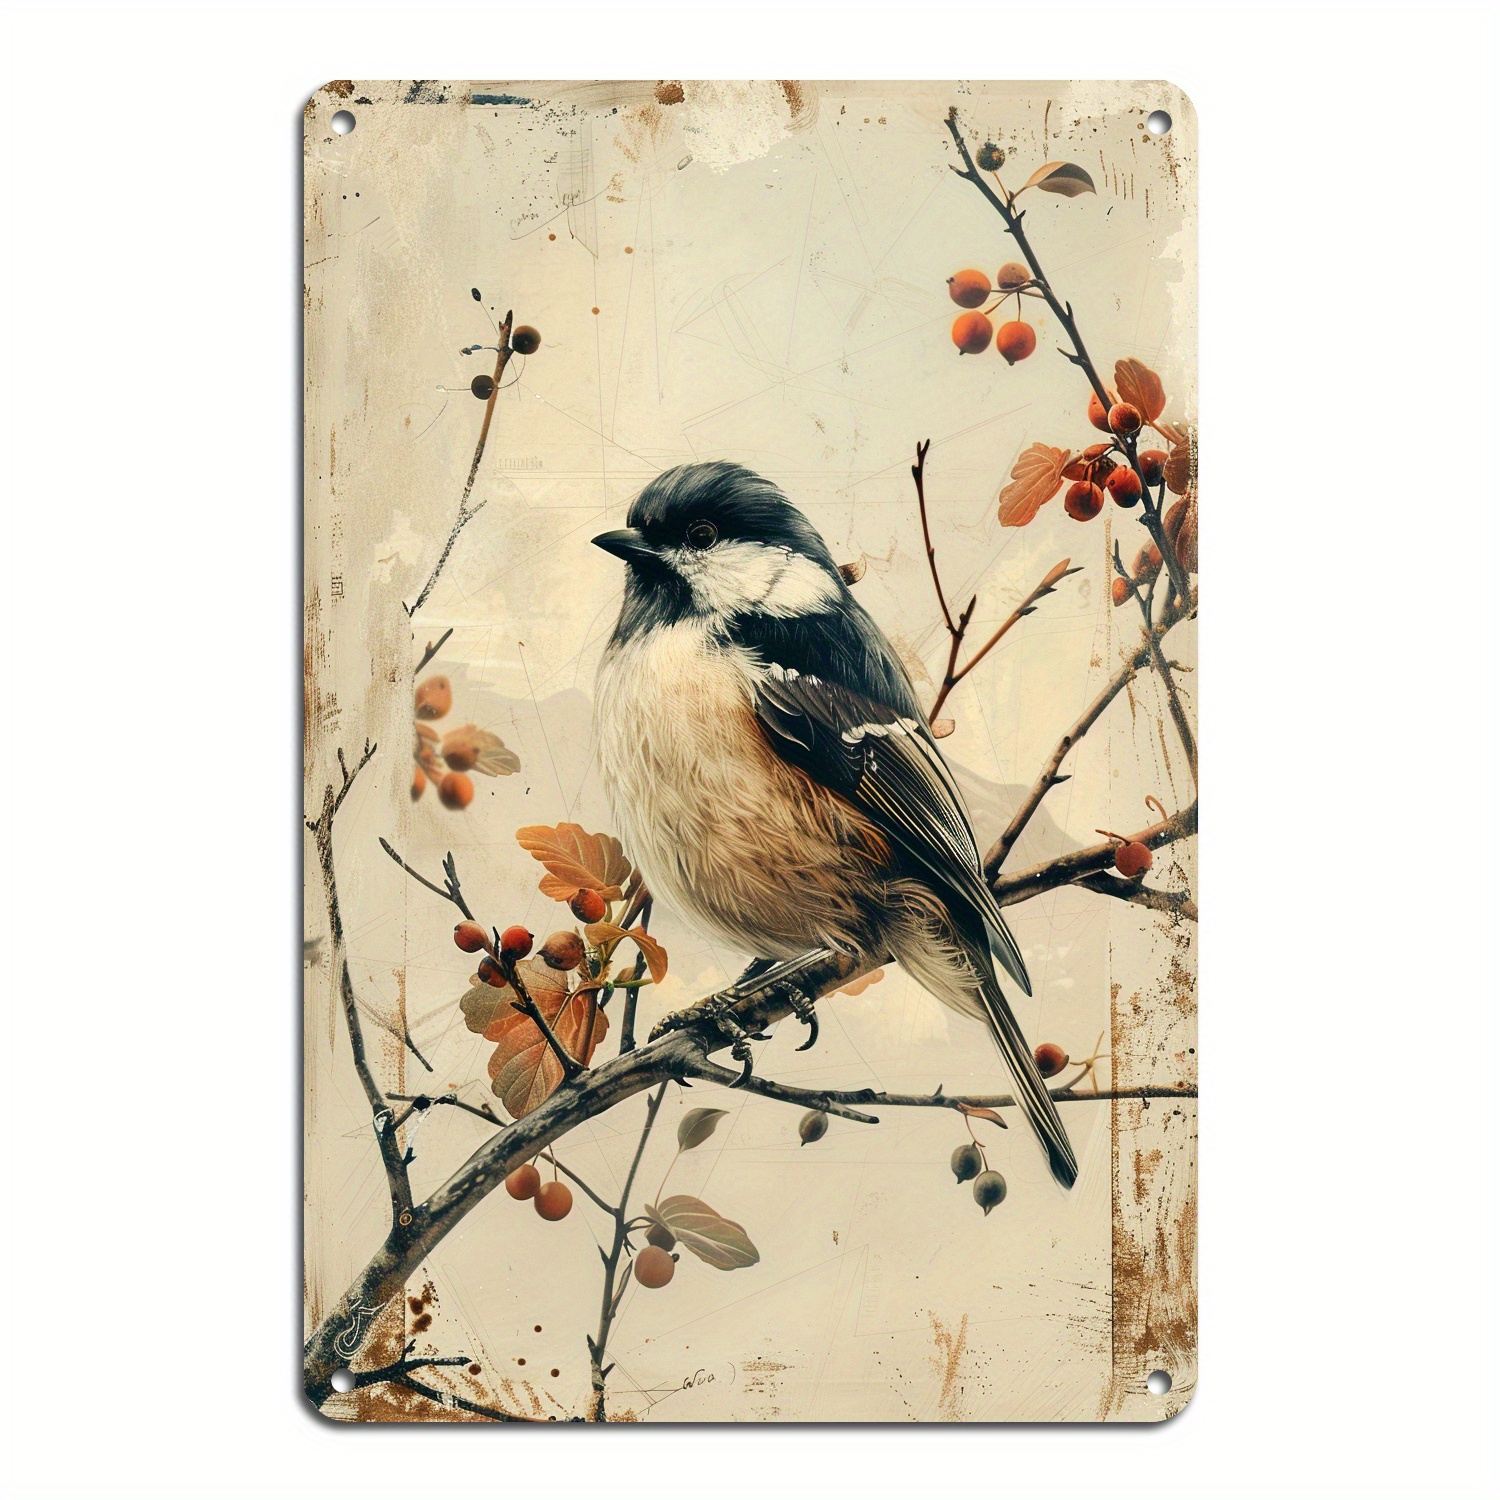 

1pc 8x12in/20*30cm Watercolor Bird Branch Metal Tin Sign, Cute Vintage Wall Hanging Plaque, For Home Restaurant Bathroom Garage Office Bakery Decor